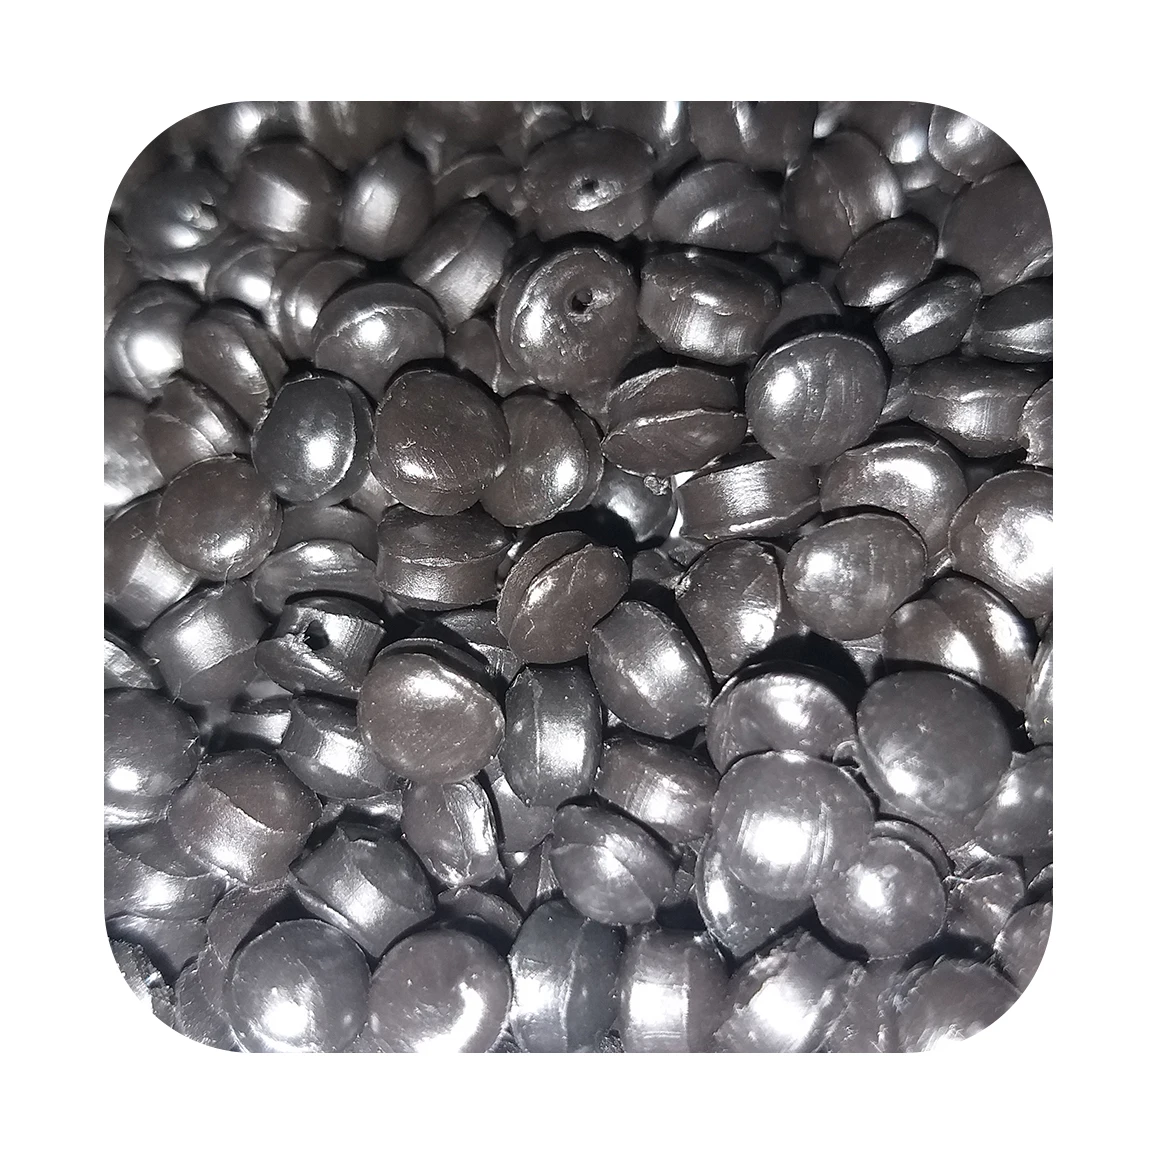 Recycled Granulated Plastic Polymer Polypropylene (PP), Round Shape, Industrial/Business Usage, Lowest Prices on The Market